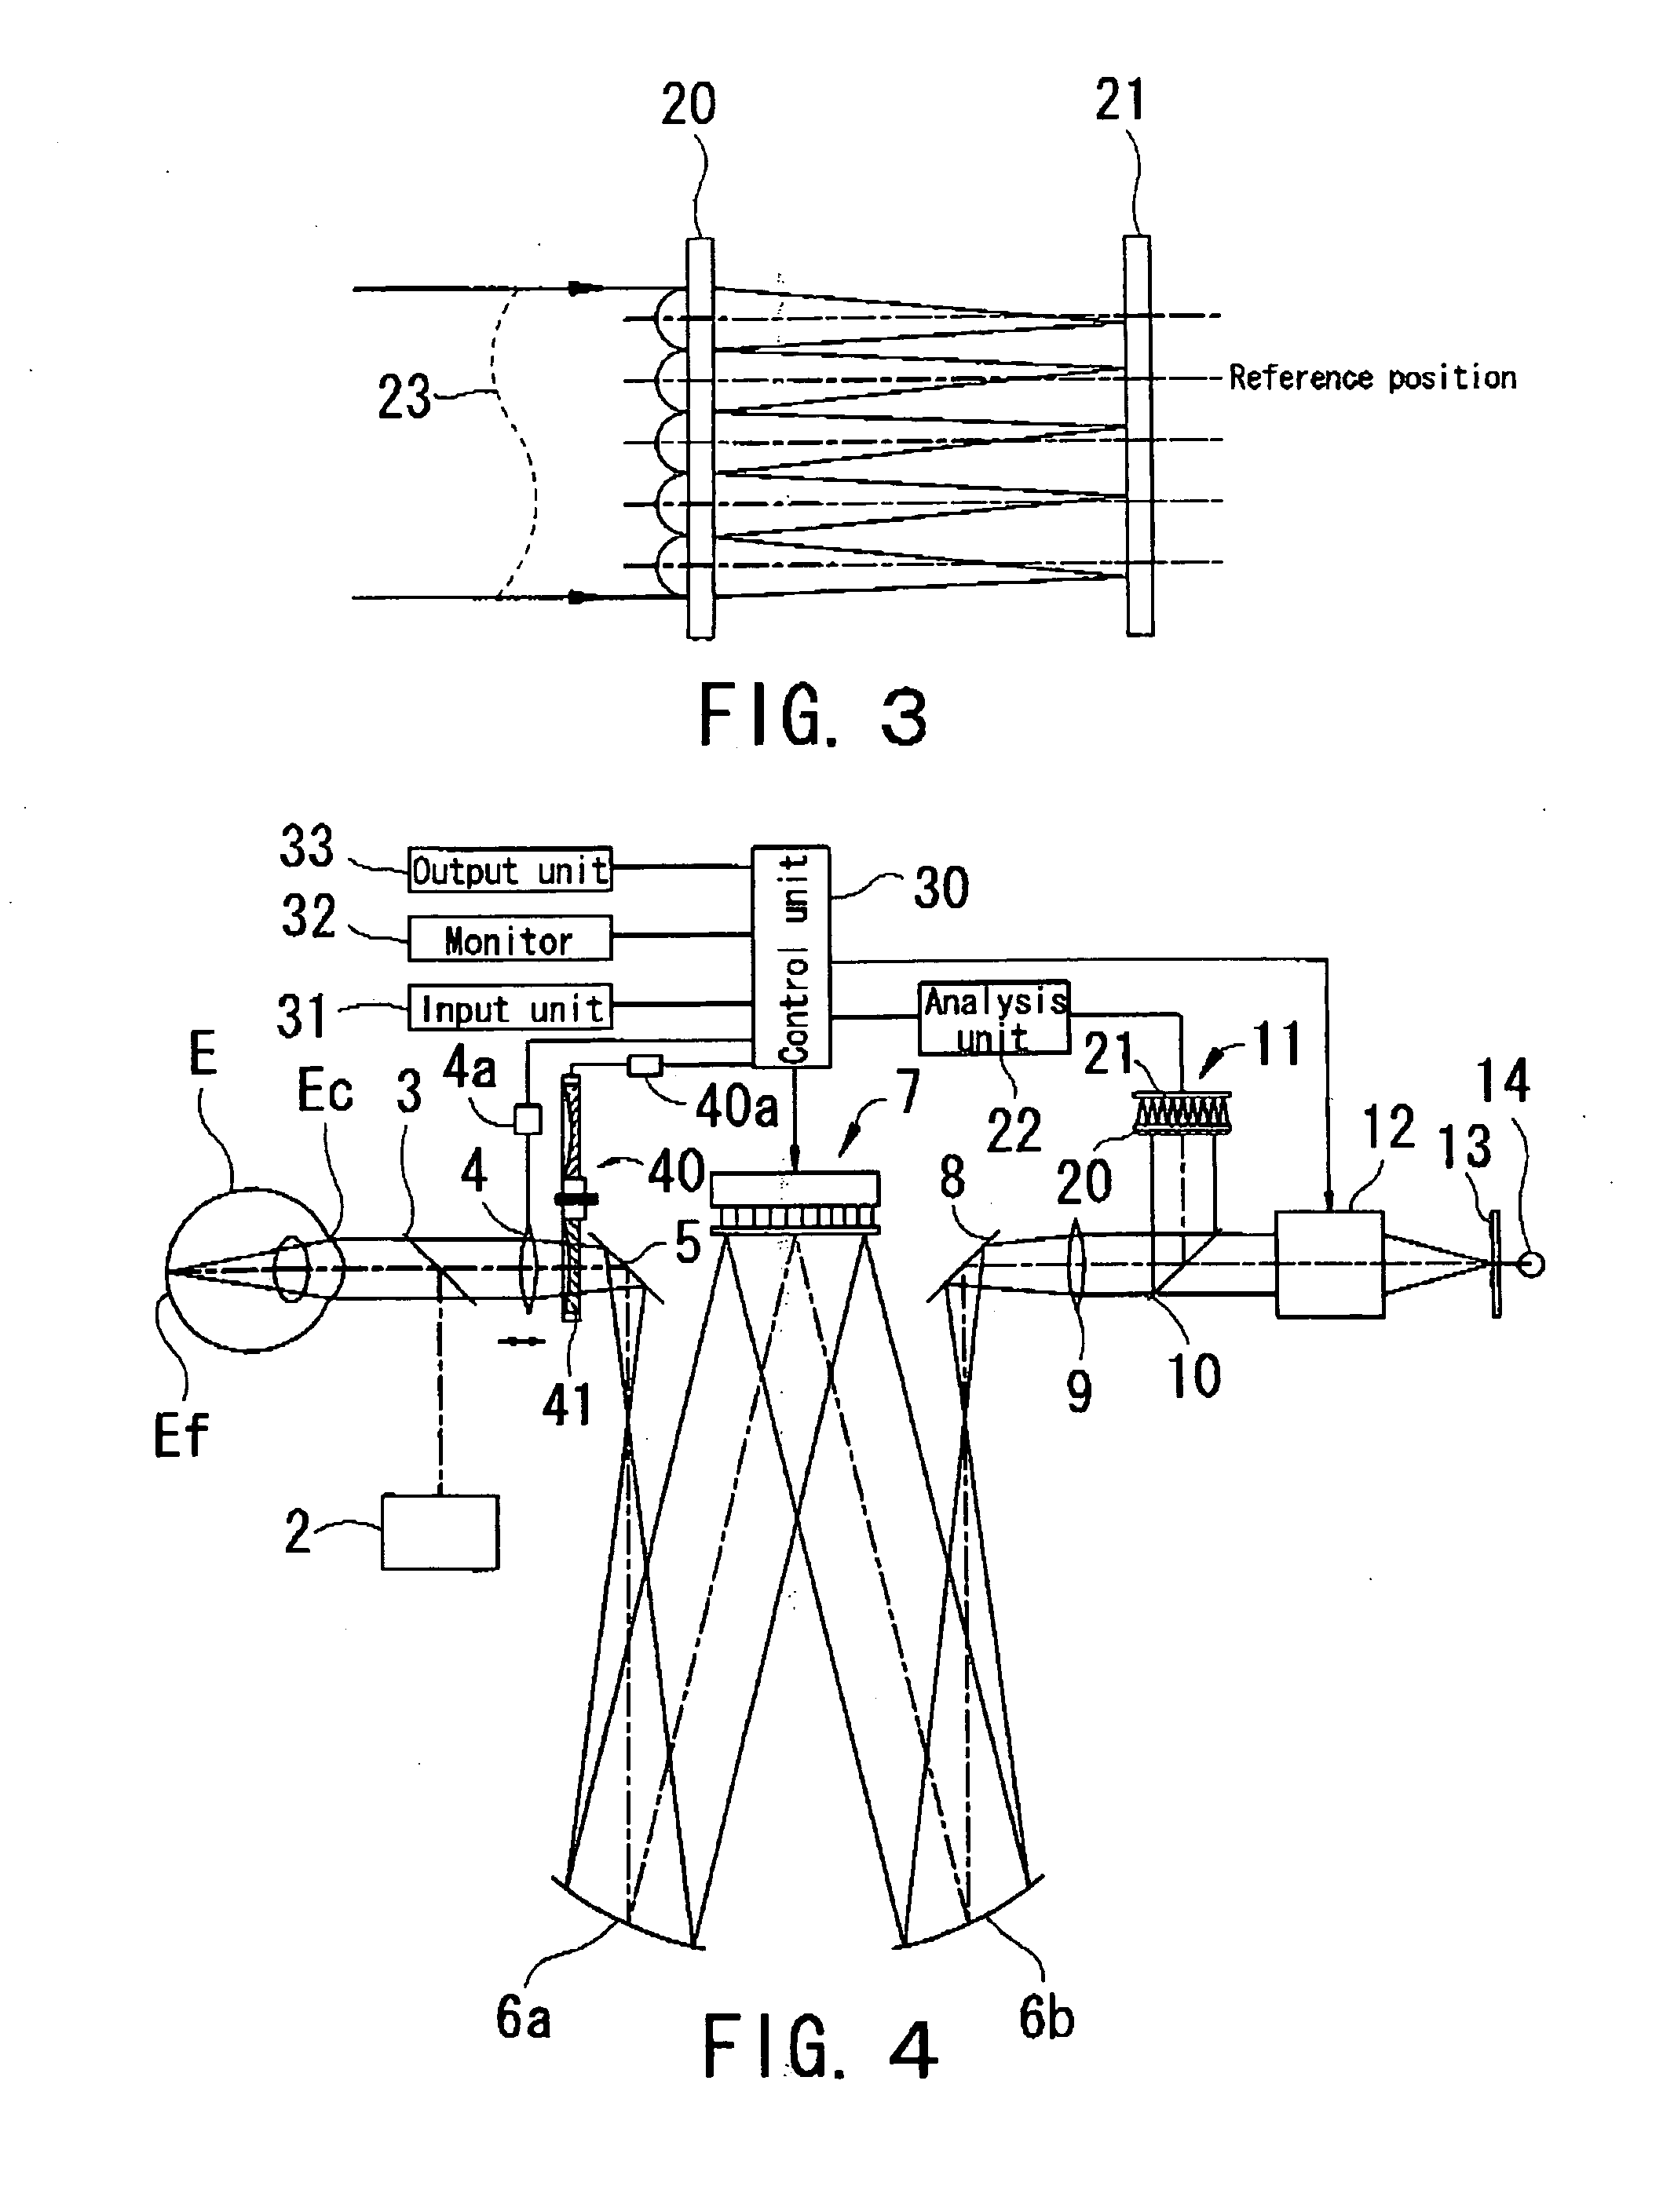 Ophthalmic apparatus